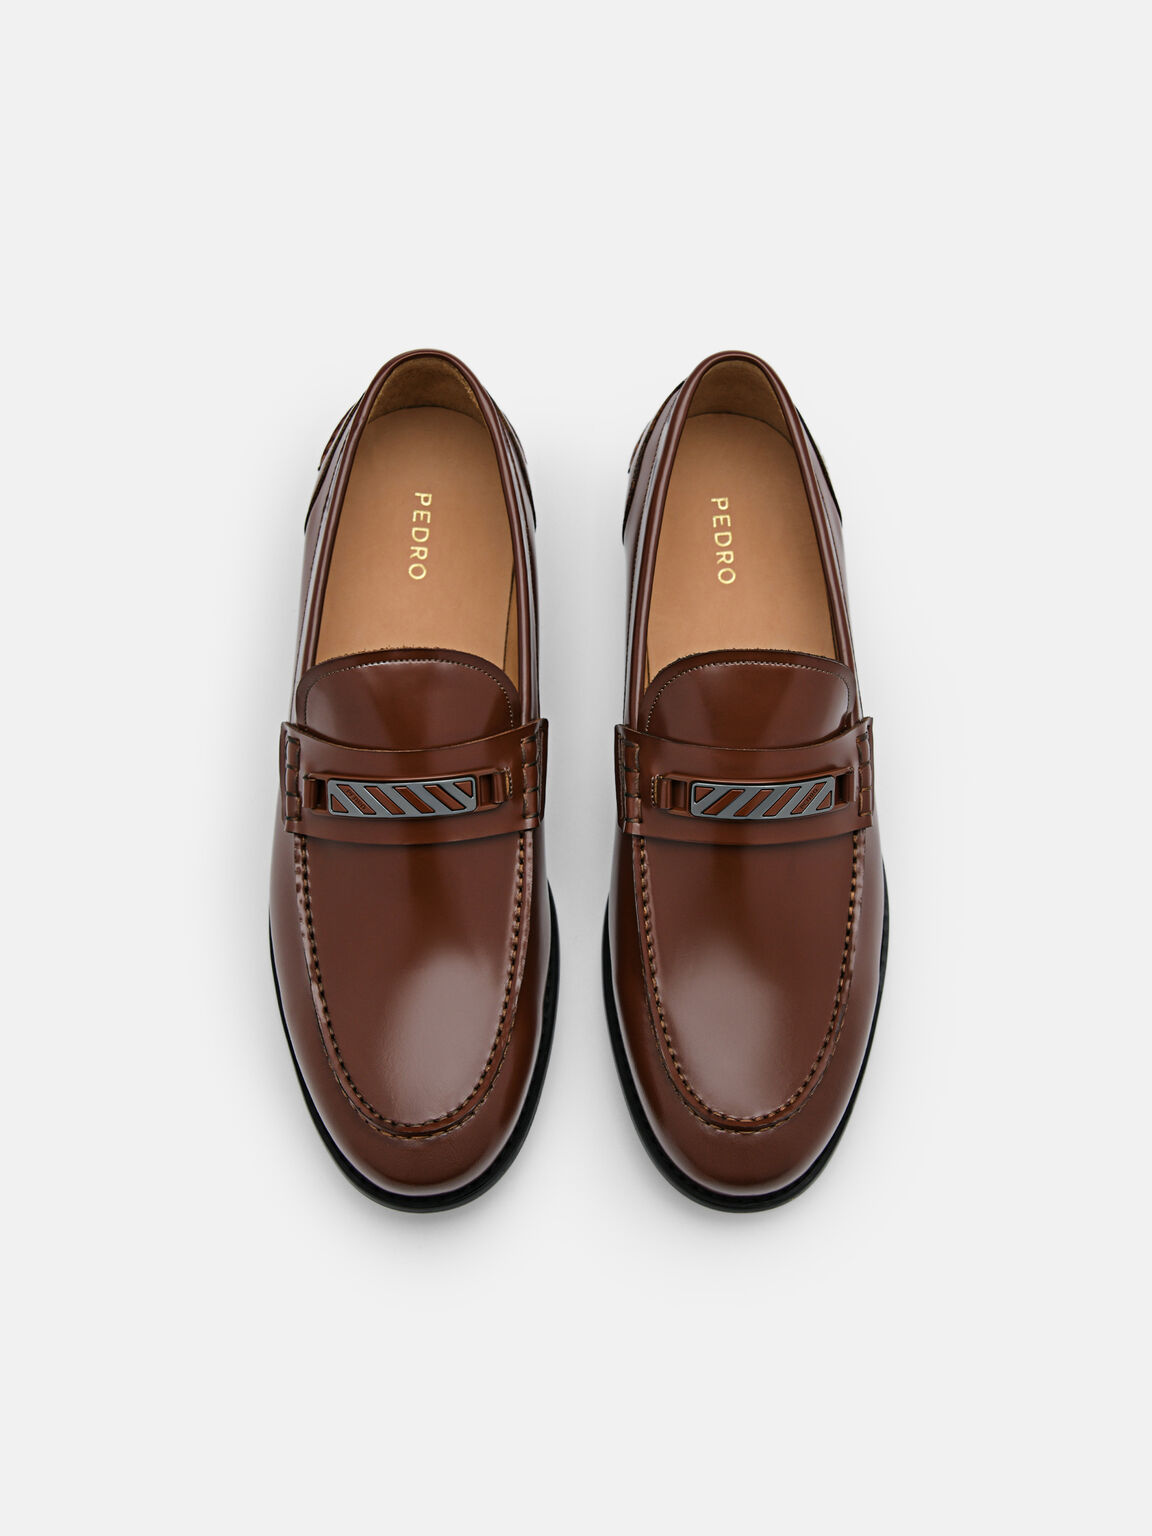 Leather Horsebit Loafers, Brown, hi-res